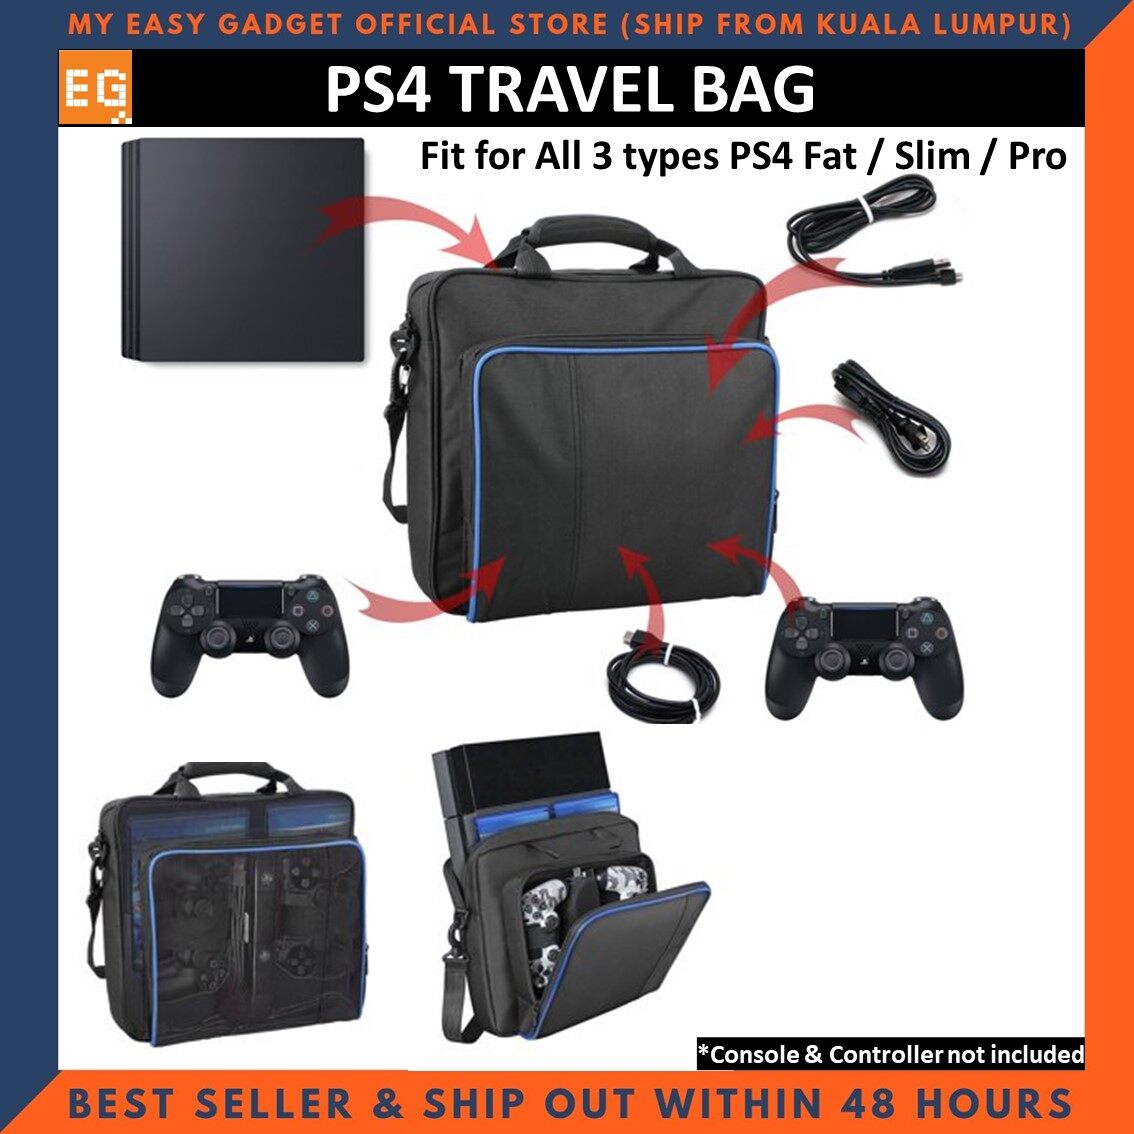 PS4 PS5 Bag Canvas Carry Bag Case Protective Travel Storage Carry Handbag Outdoor Travel Waterproof Nylon Playstation 4 5